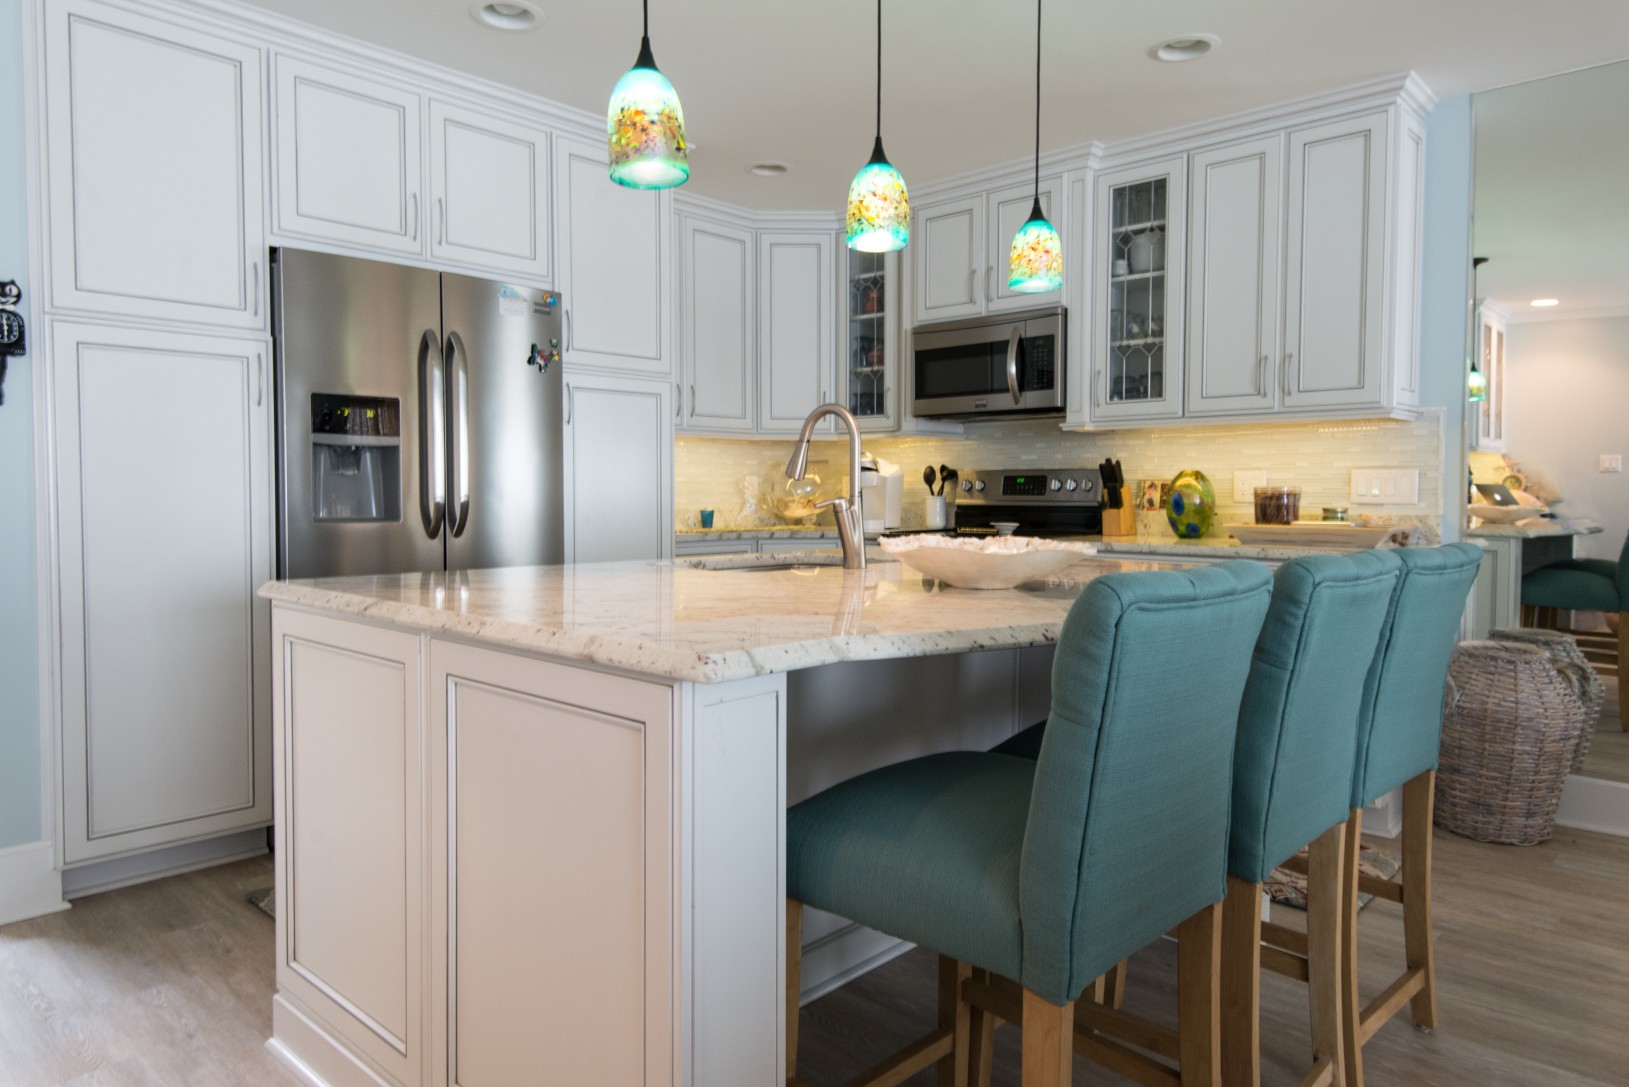 Kings Grant Renovation Vol.1 Kitchen with Center Island, Andromeda White Granite Countertop, Three-Light Pendant and White Cabinets